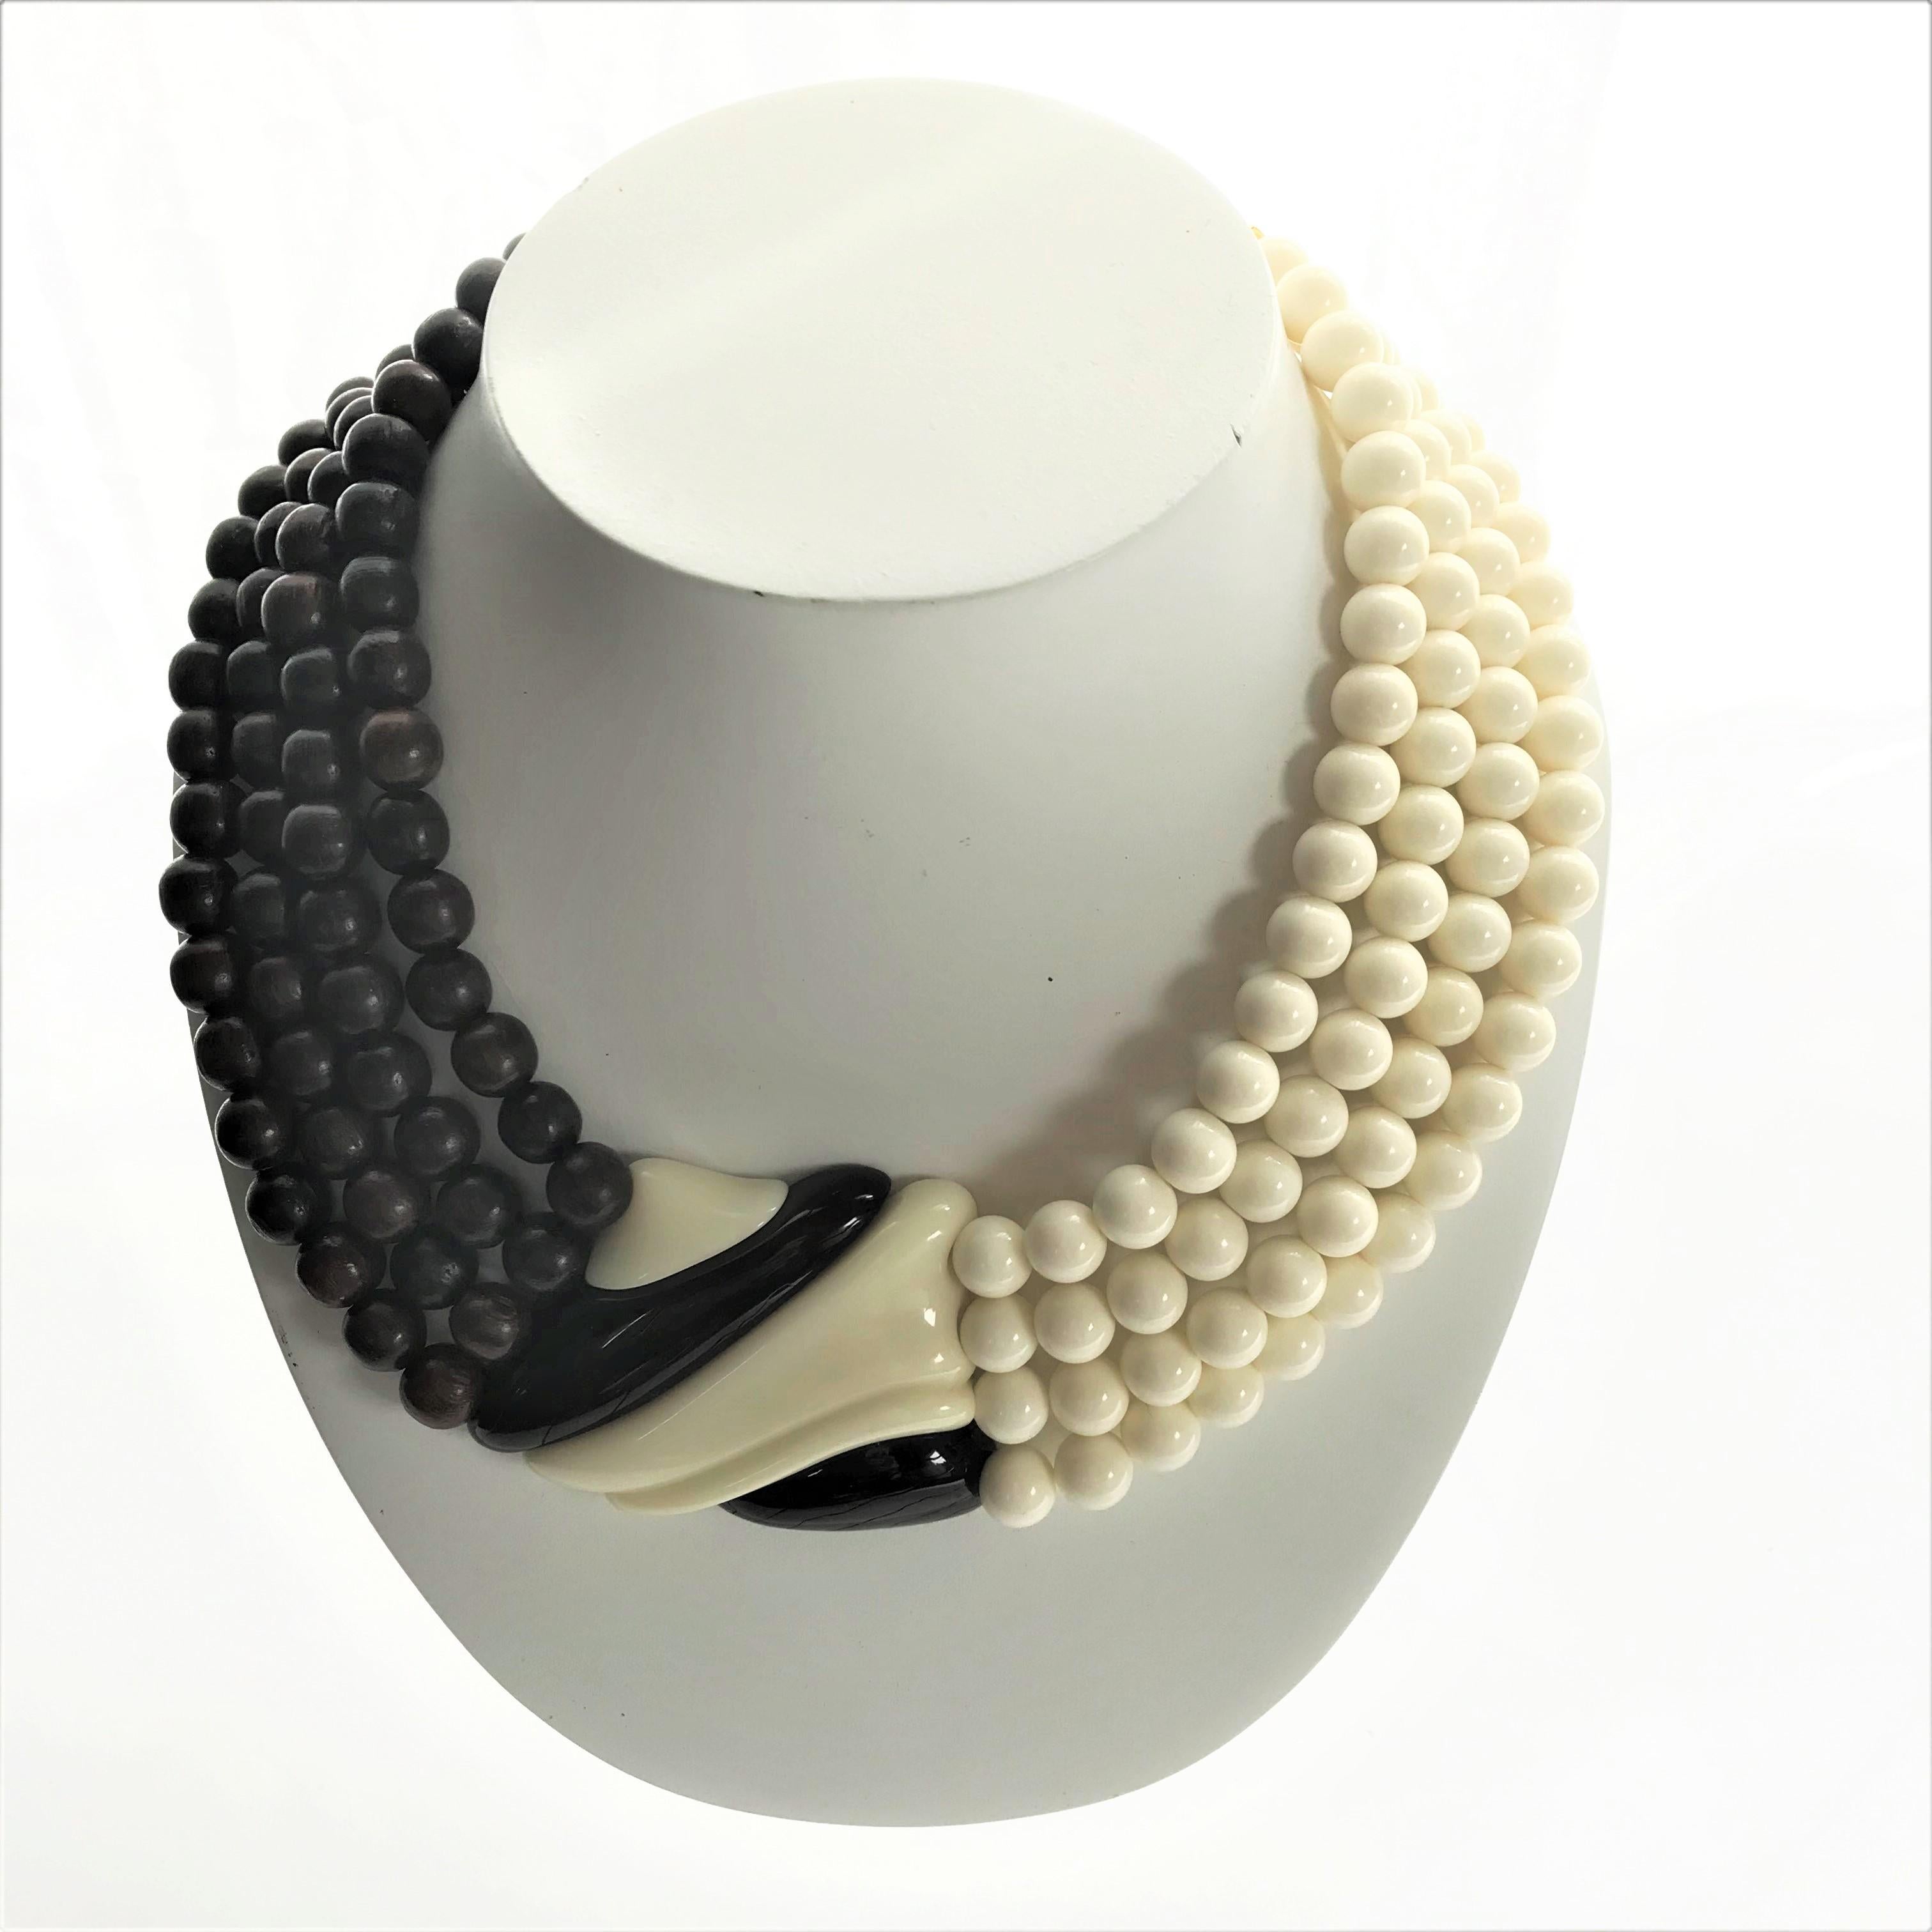 Iconic Yves Sant Laurent necklace with matching ear clip. One half of the chain consists of brown wooden balls, the other side of ivory colored plastic balls. In the middle a part consisting of the colors of the balls on both sides. 
Measurements: